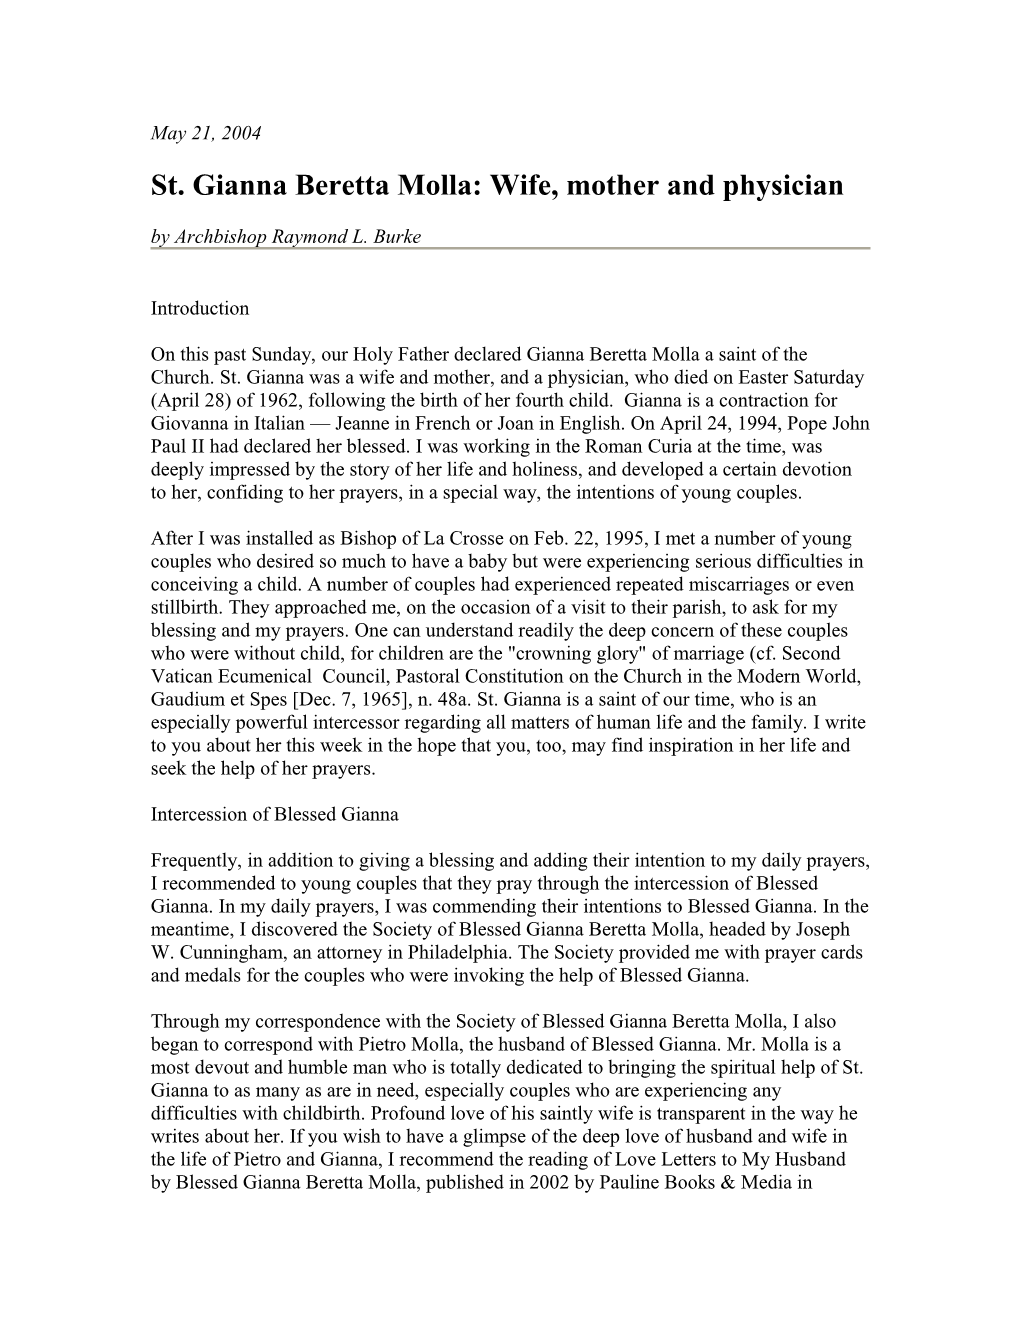 May 21, 2004 St. Gianna Beretta Molla: Wife, Mother and Physician by Archbishop Raymond L. Burke